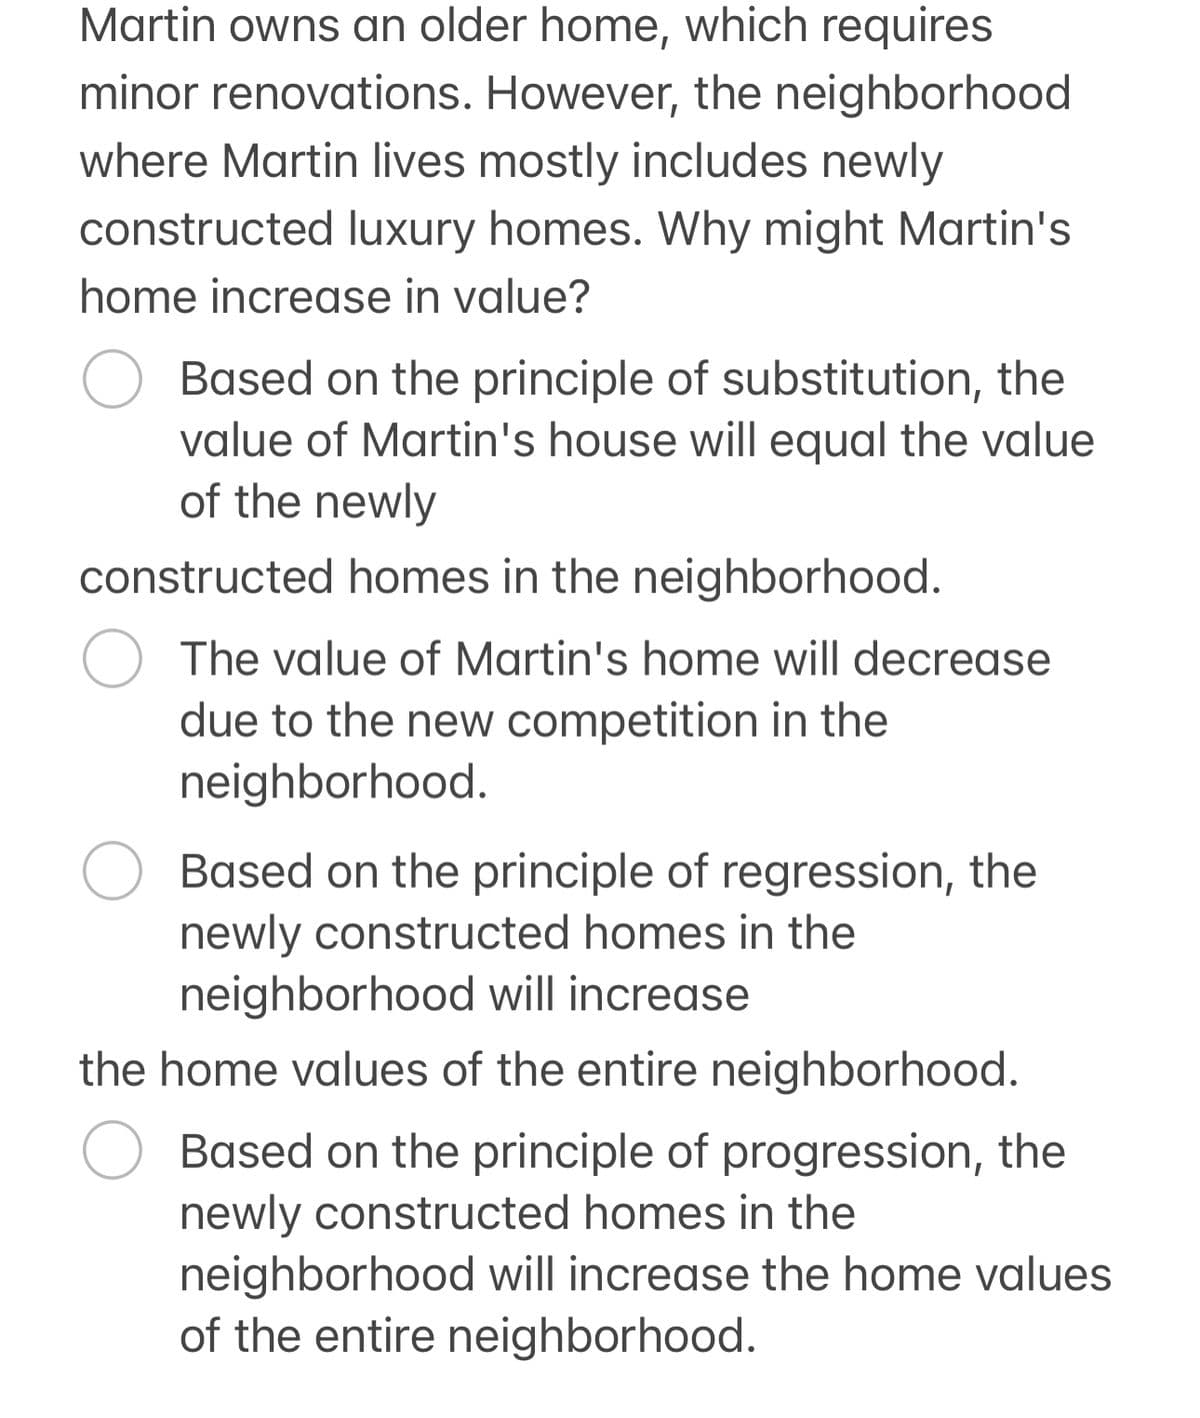 Martin owns an older home, which requires
minor renovations. However, the neighborhood
where Martin lives mostly includes newly
constructed luxury homes. Why might Martin's
home increase in value?
Based on the principle of substitution, the
value of Martin's house will equal the value
of the newly
constructed homes in the neighborhood.
○ The value of Martin's home will decrease
due to the new competition in the
neighborhood.
Based on the principle of regression, the
newly constructed homes in the
neighborhood will increase
the home values of the entire neighborhood.
Based on the principle of progression, the
newly constructed homes in the
neighborhood will increase the home values
of the entire neighborhood.